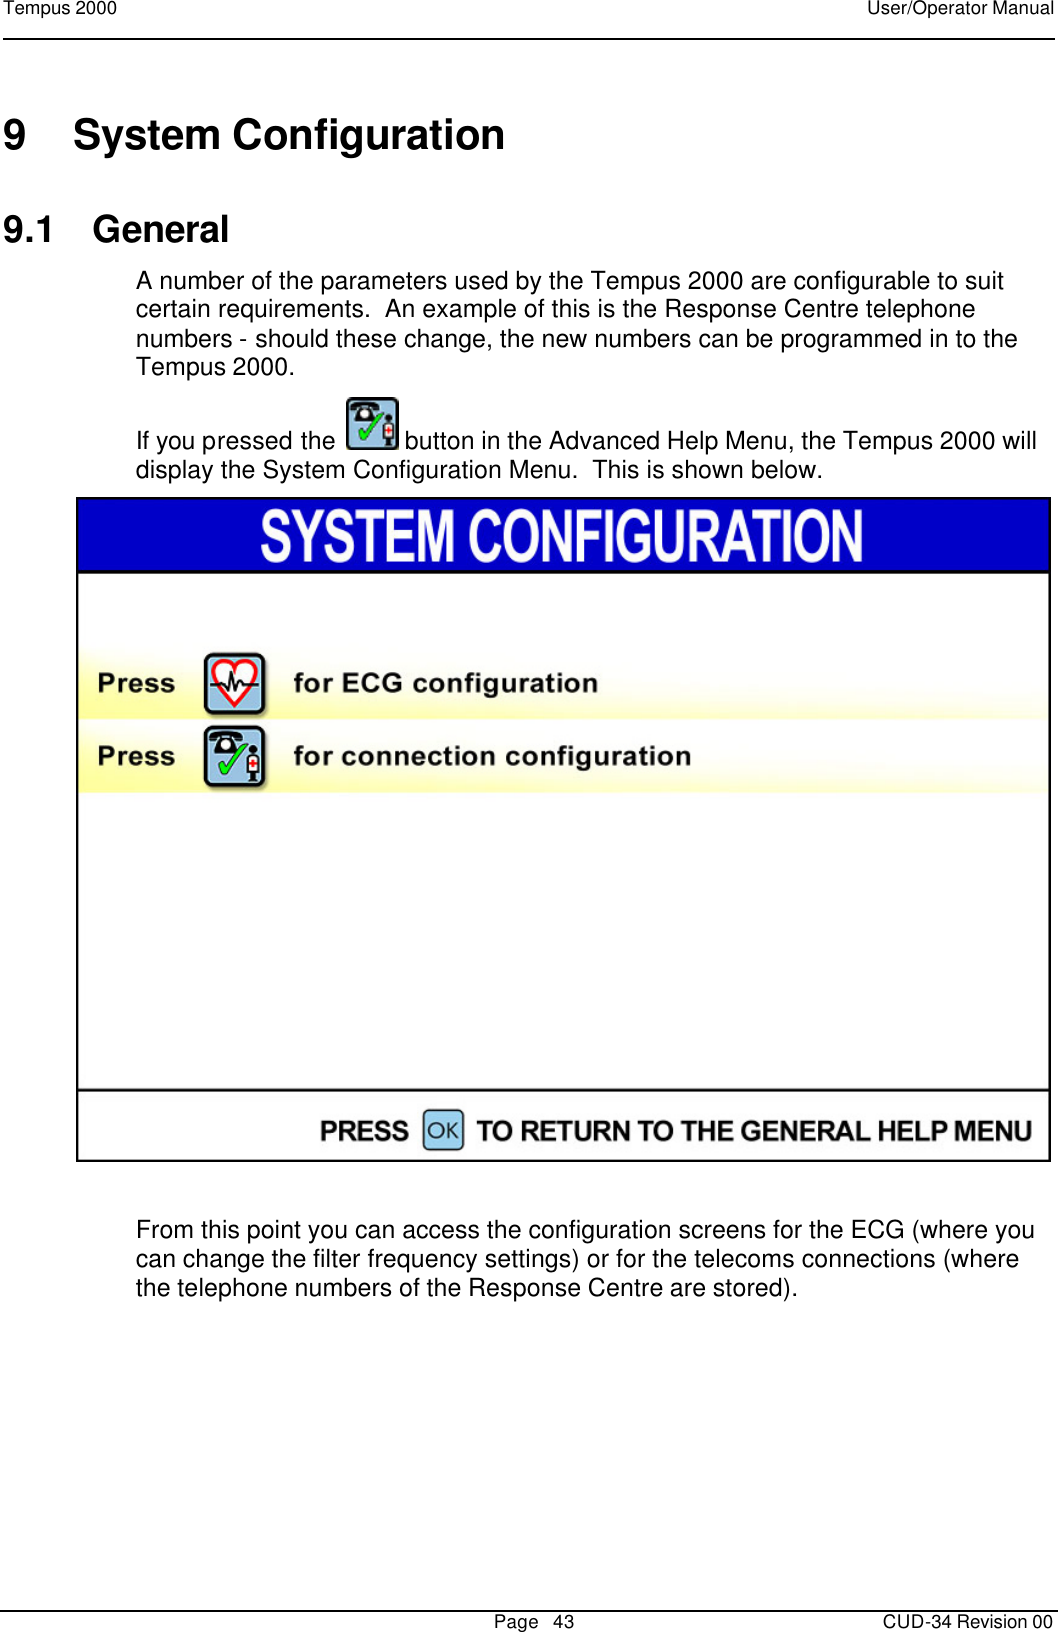 Tempus 2000    User/Operator Manual       Page   43   CUD-34 Revision 00 9 System Configuration 9.1 General A number of the parameters used by the Tempus 2000 are configurable to suit certain requirements.  An example of this is the Response Centre telephone numbers - should these change, the new numbers can be programmed in to the Tempus 2000.   If you pressed the   button in the Advanced Help Menu, the Tempus 2000 will display the System Configuration Menu.  This is shown below.   From this point you can access the configuration screens for the ECG (where you can change the filter frequency settings) or for the telecoms connections (where the telephone numbers of the Response Centre are stored). 